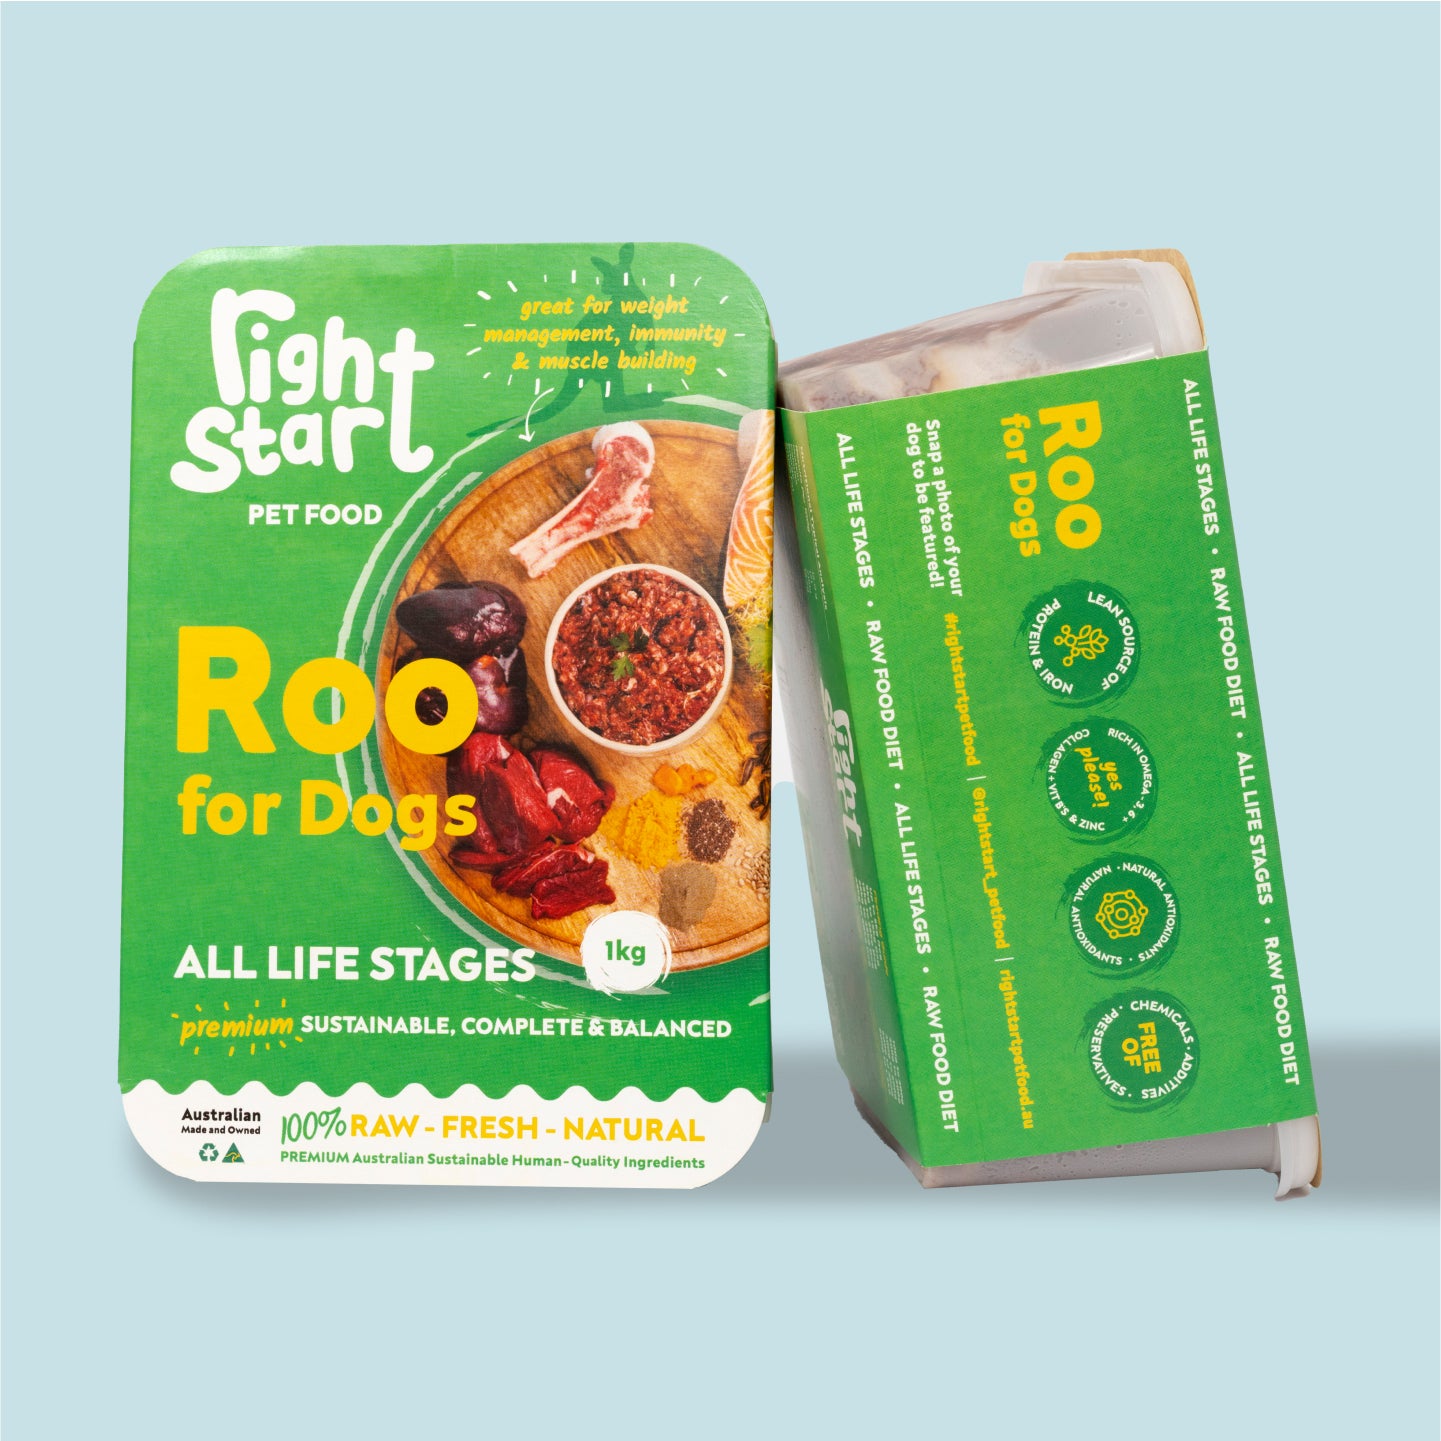 Roo meat for dogs green package right start pet food 1kg